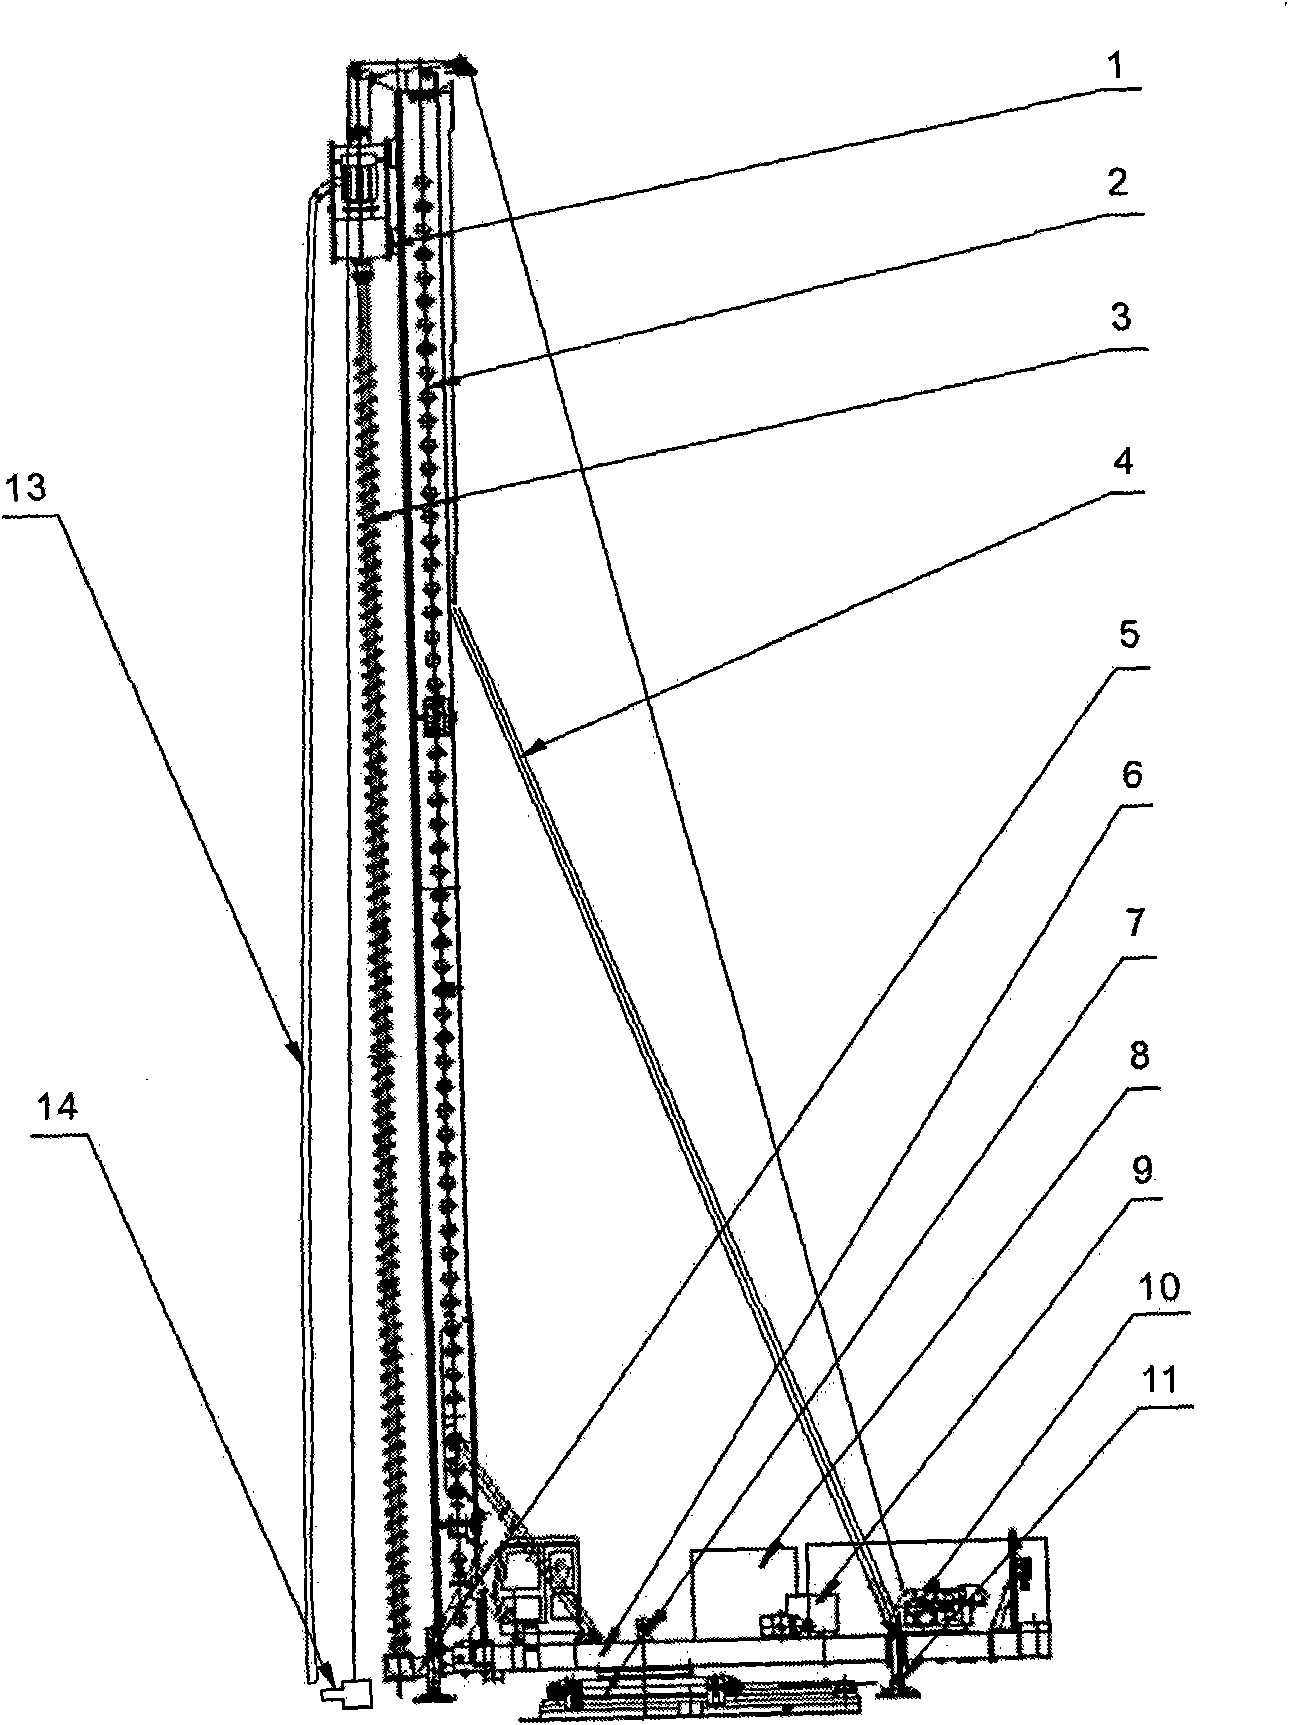 Construction method for anti-floating anchor rod and special long auger